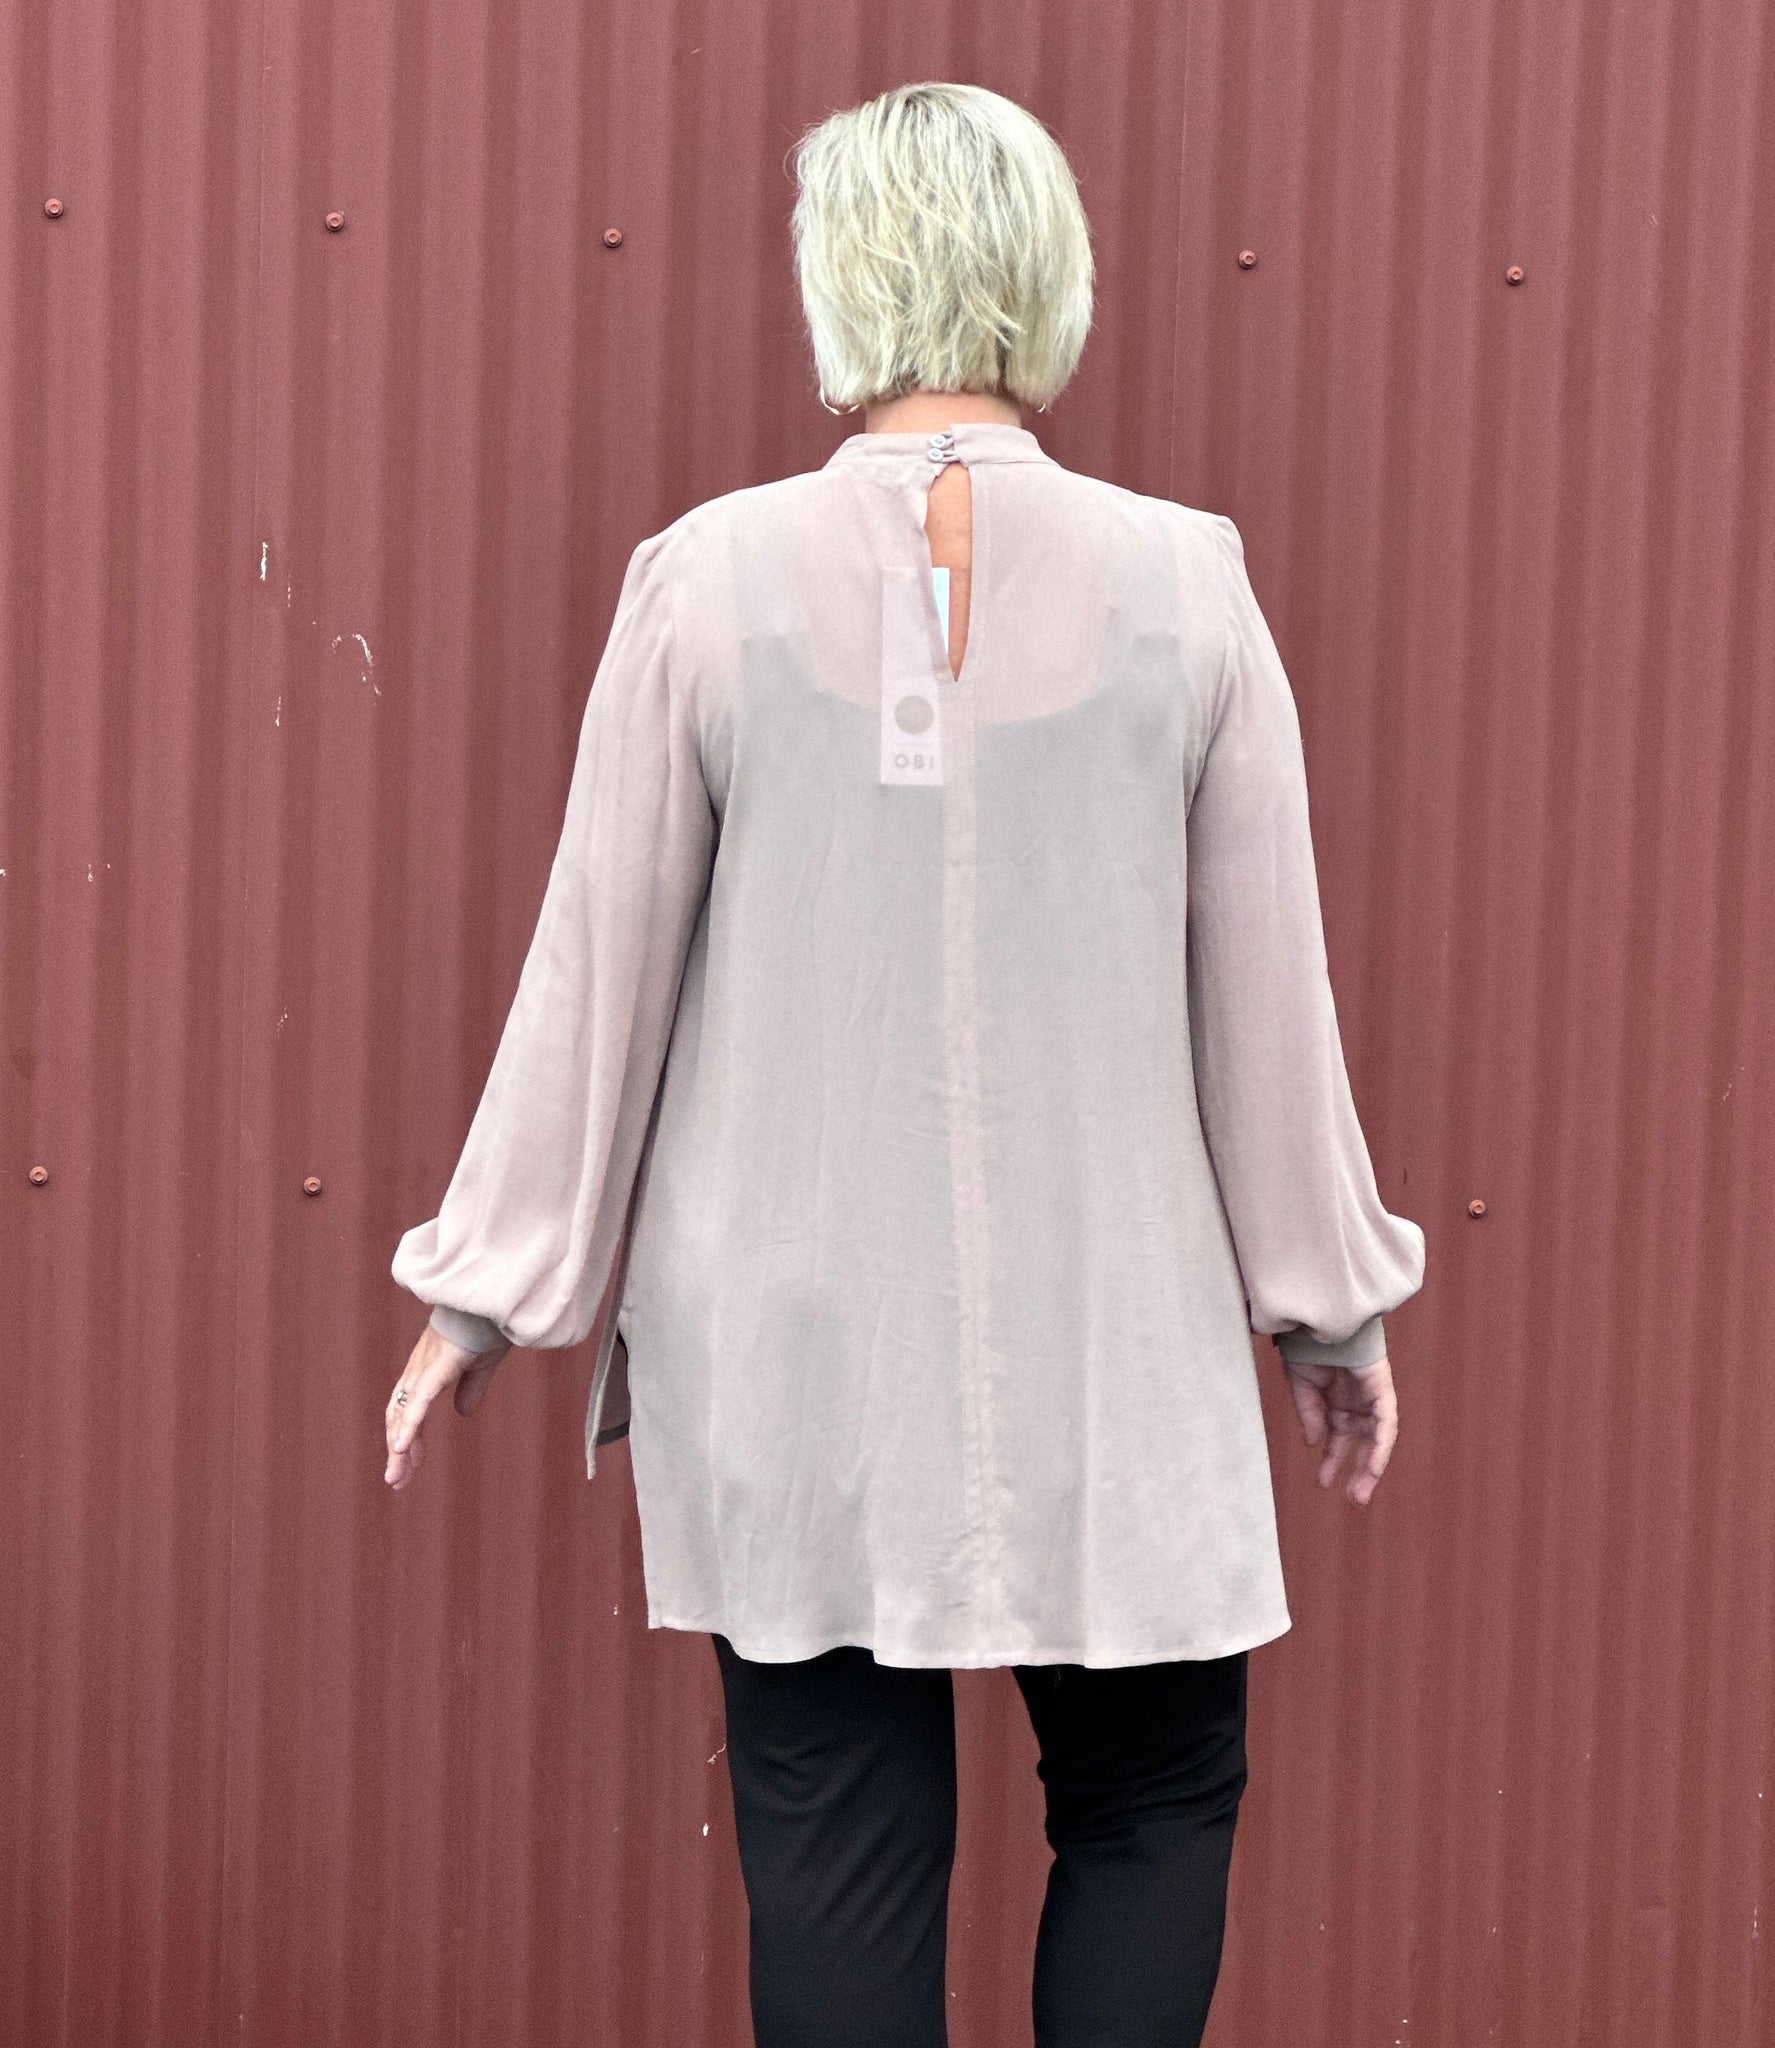 ! Arch Blouse - Laundry Meadow